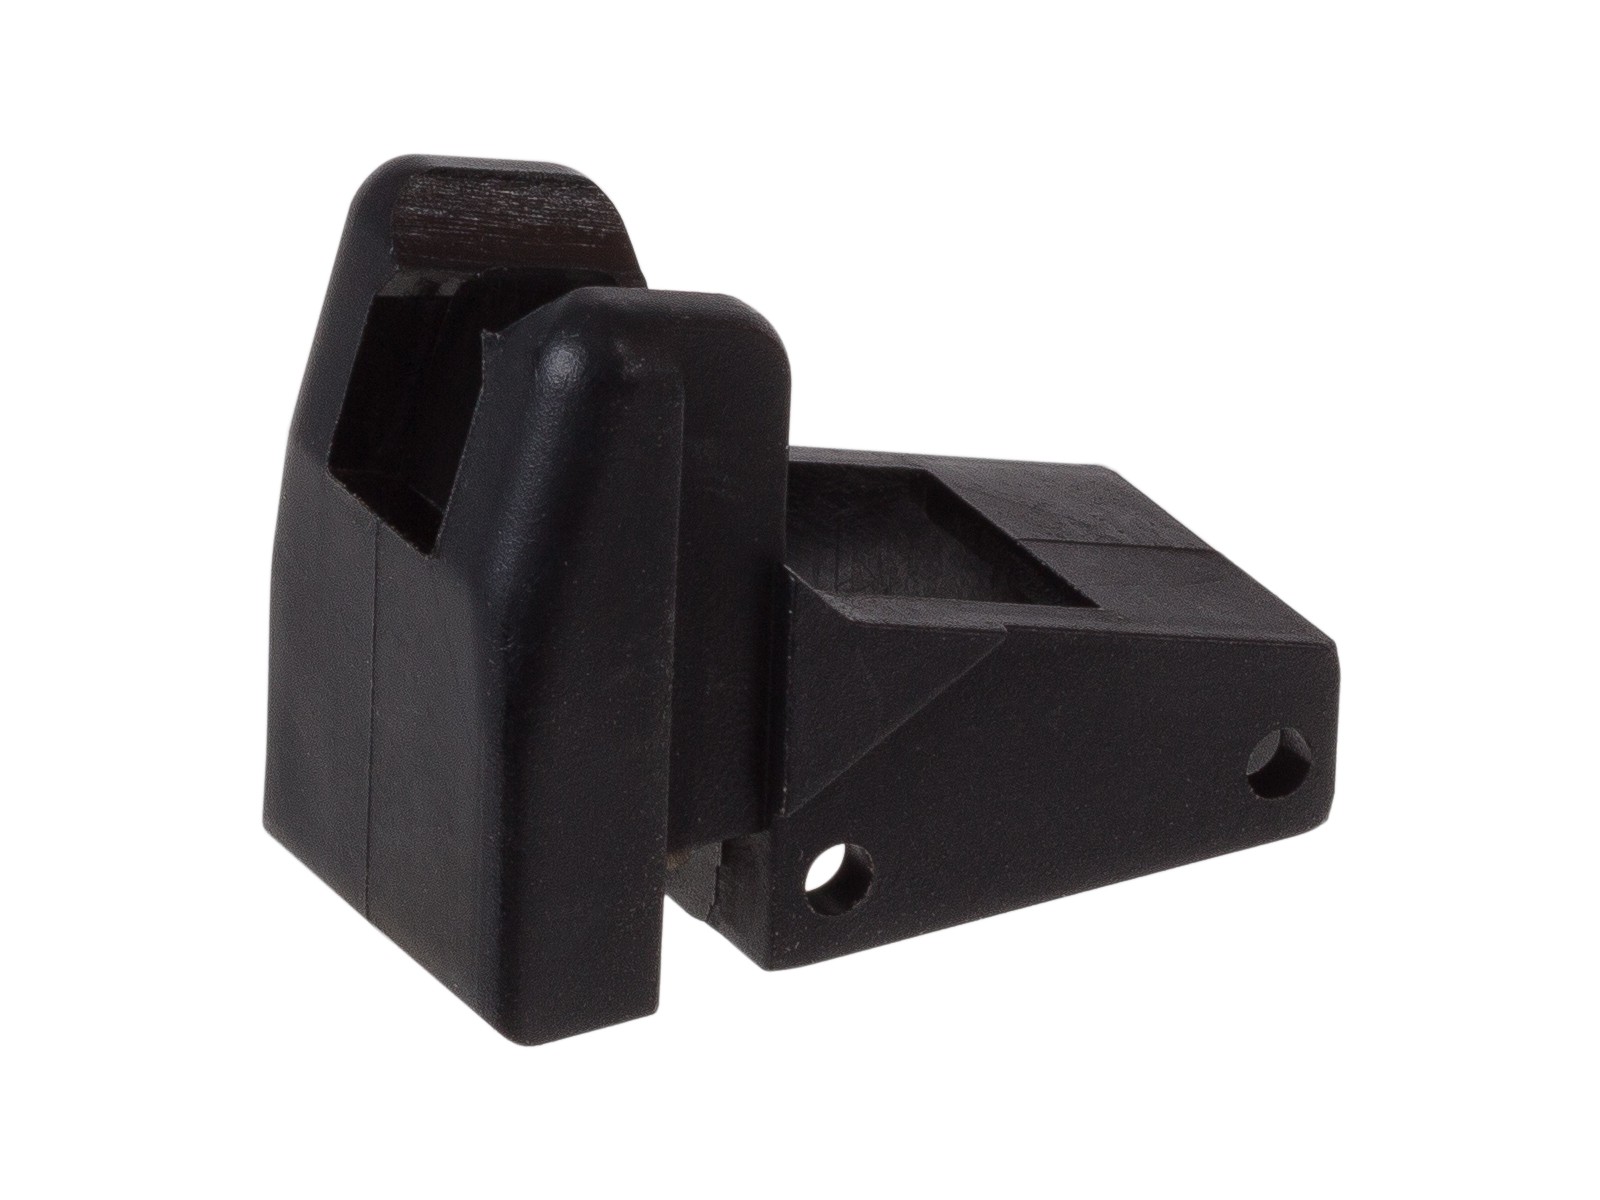 Hfc m190 magazine feed lip/lid orders over $150 